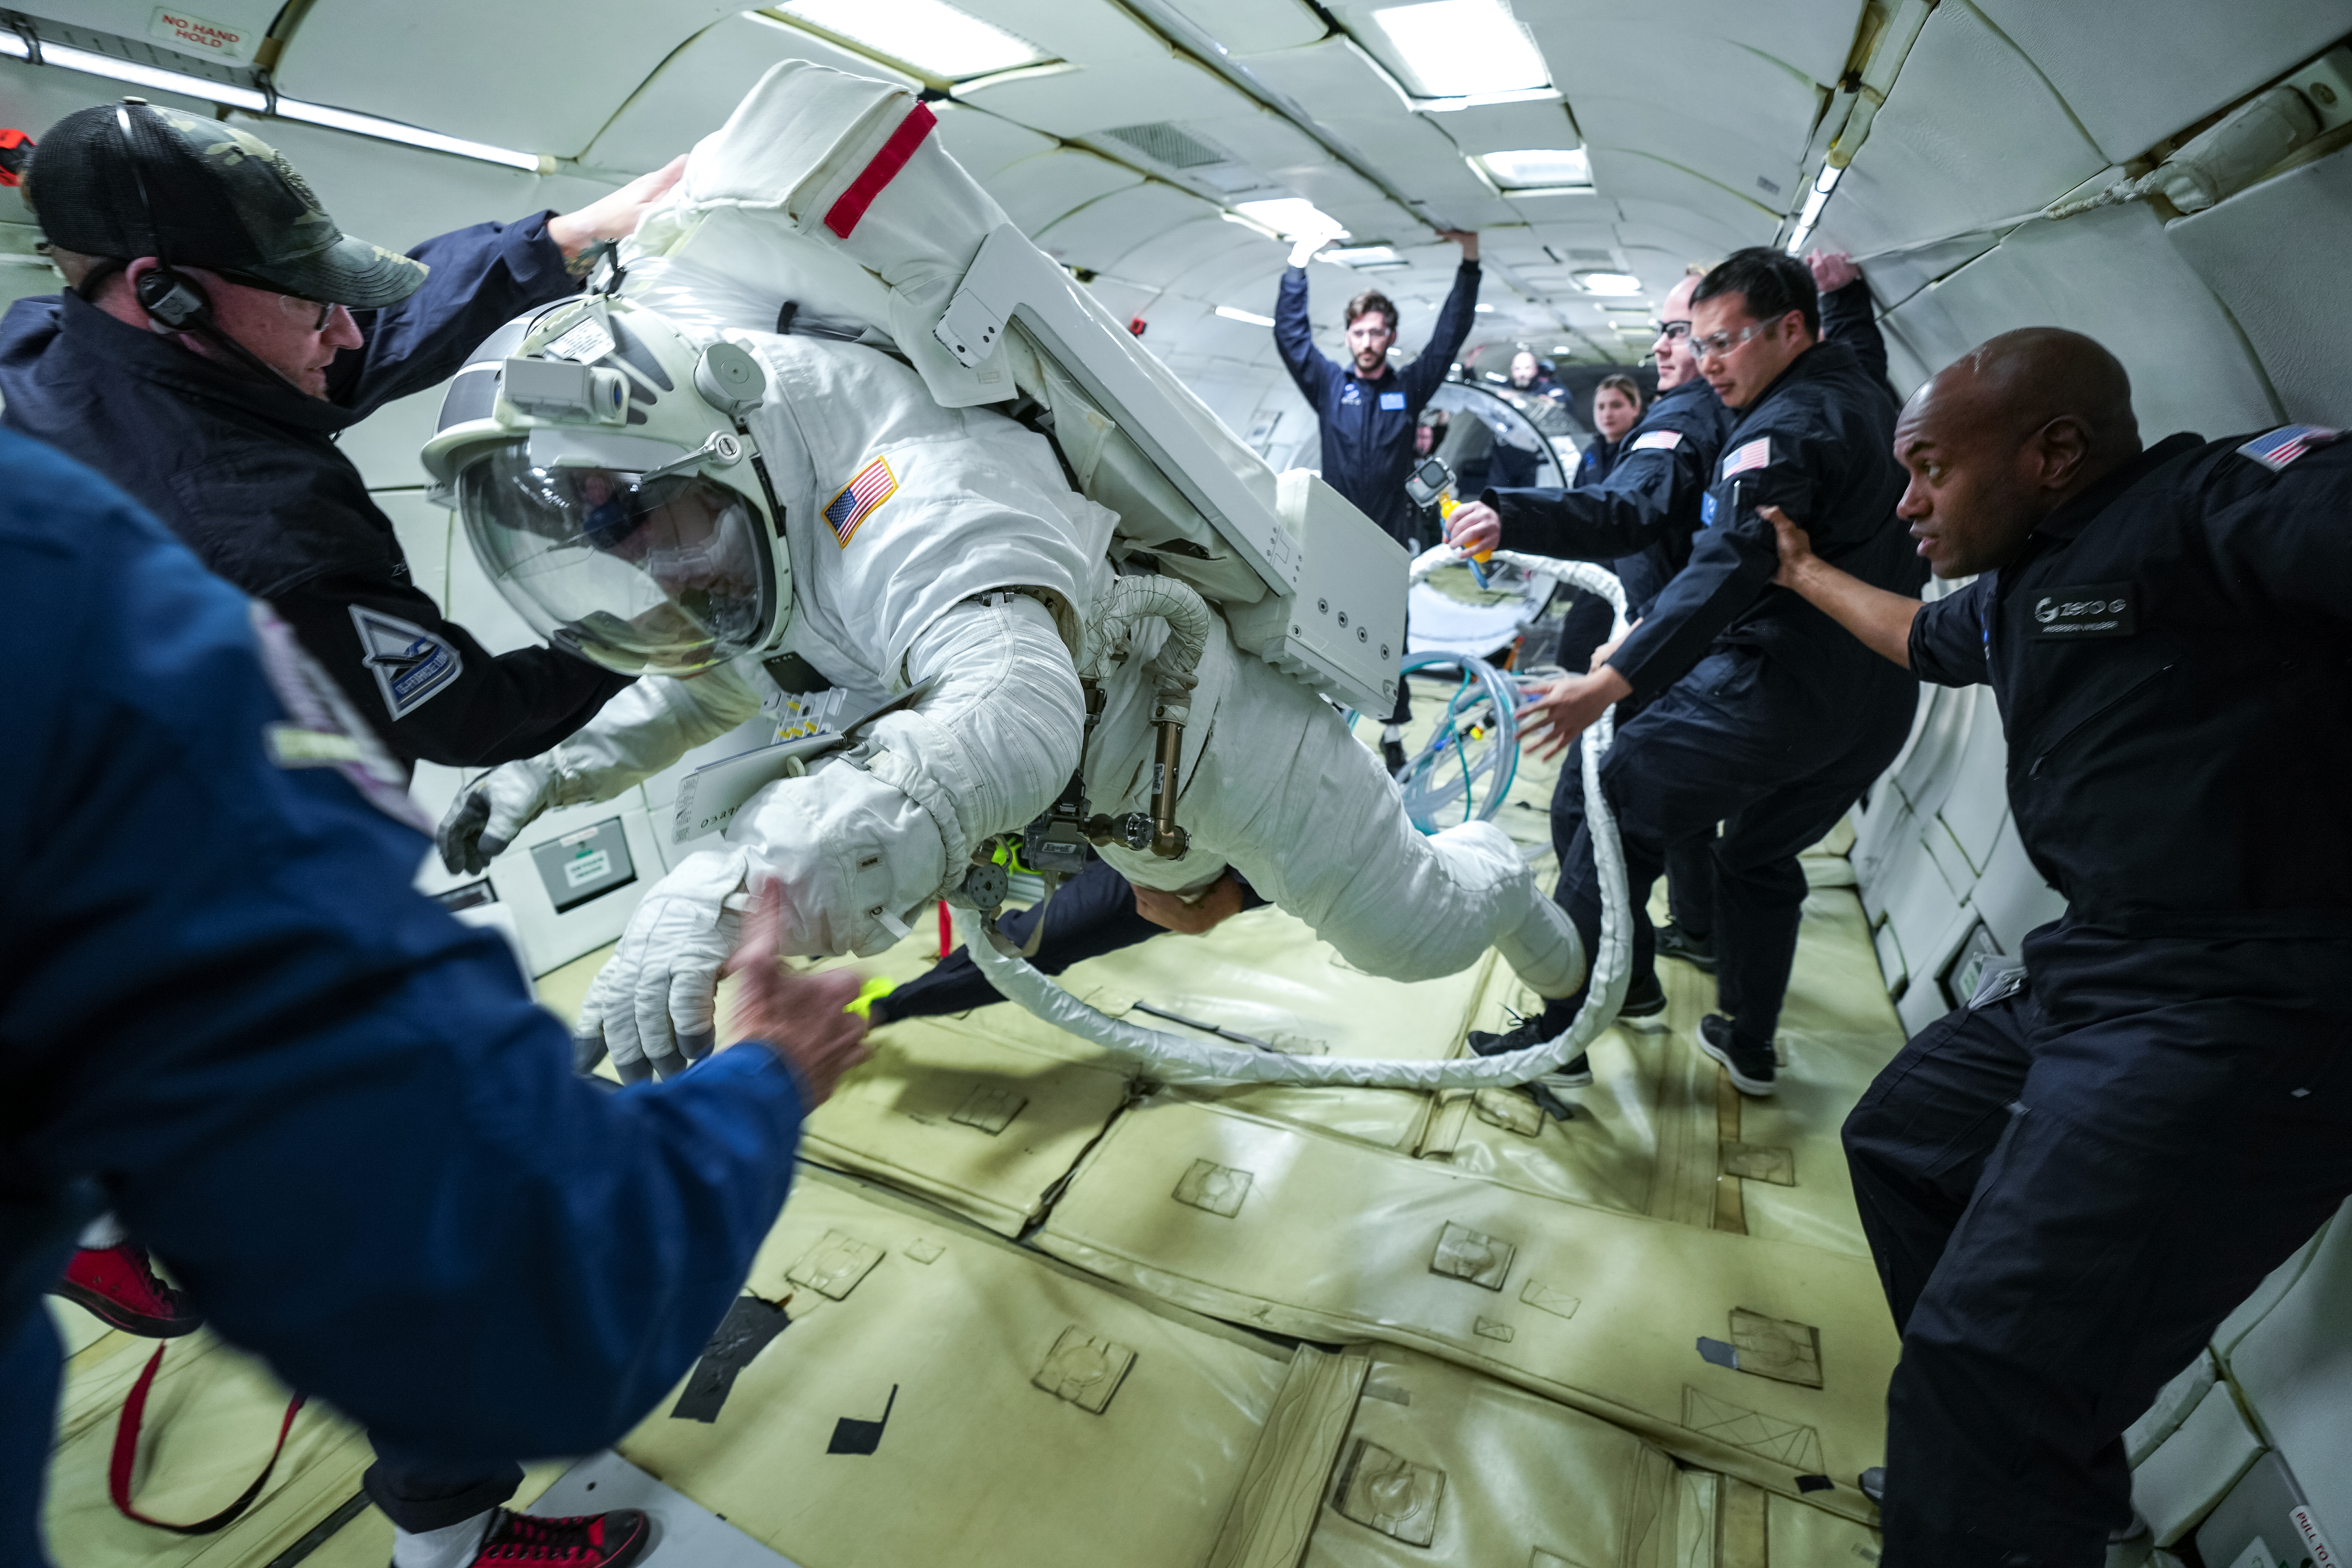 Collins Aerospace’s chief test astronaut John “Danny” Olivas demonstrates a series of tasks during testing of Collins’ next-generation spacesuit while aboard a zero-gravity aircraft.